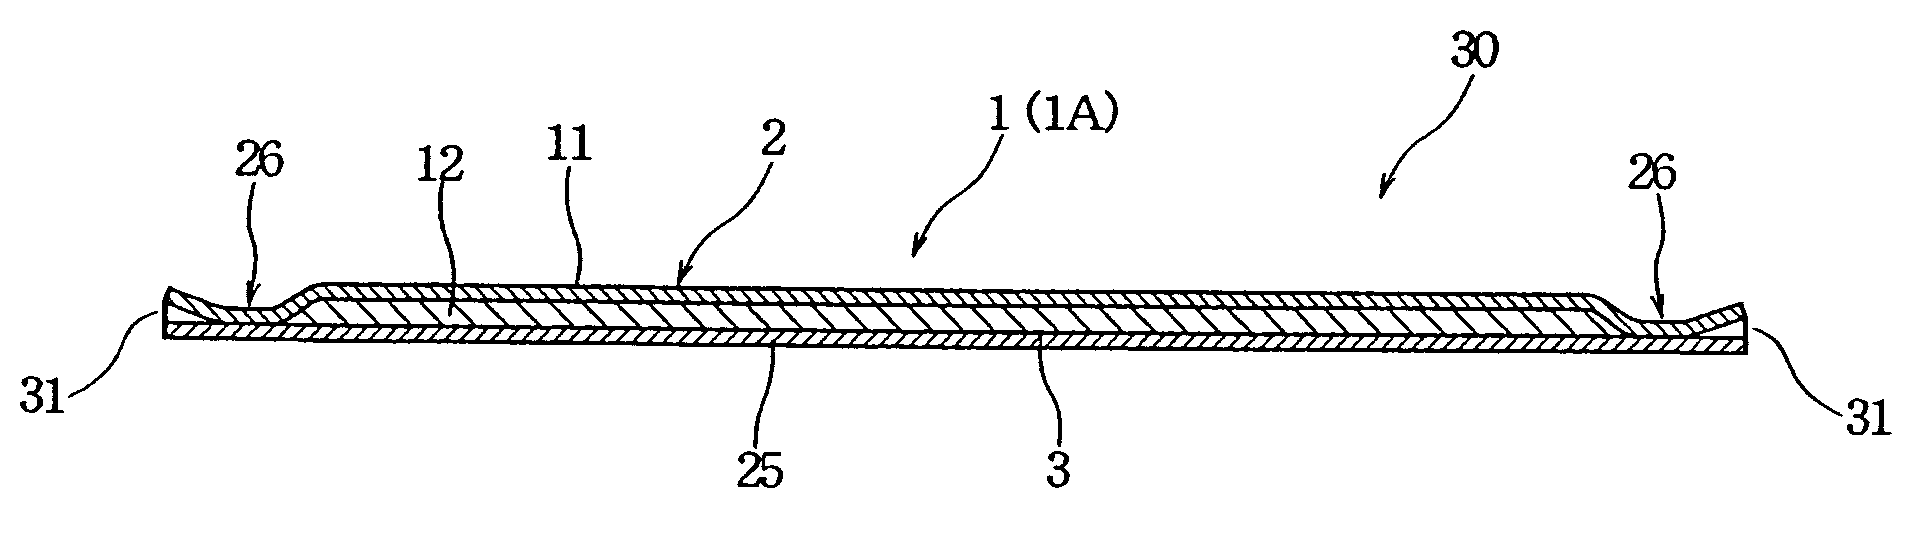 Absorbent composite sheet and absorbent article using the same